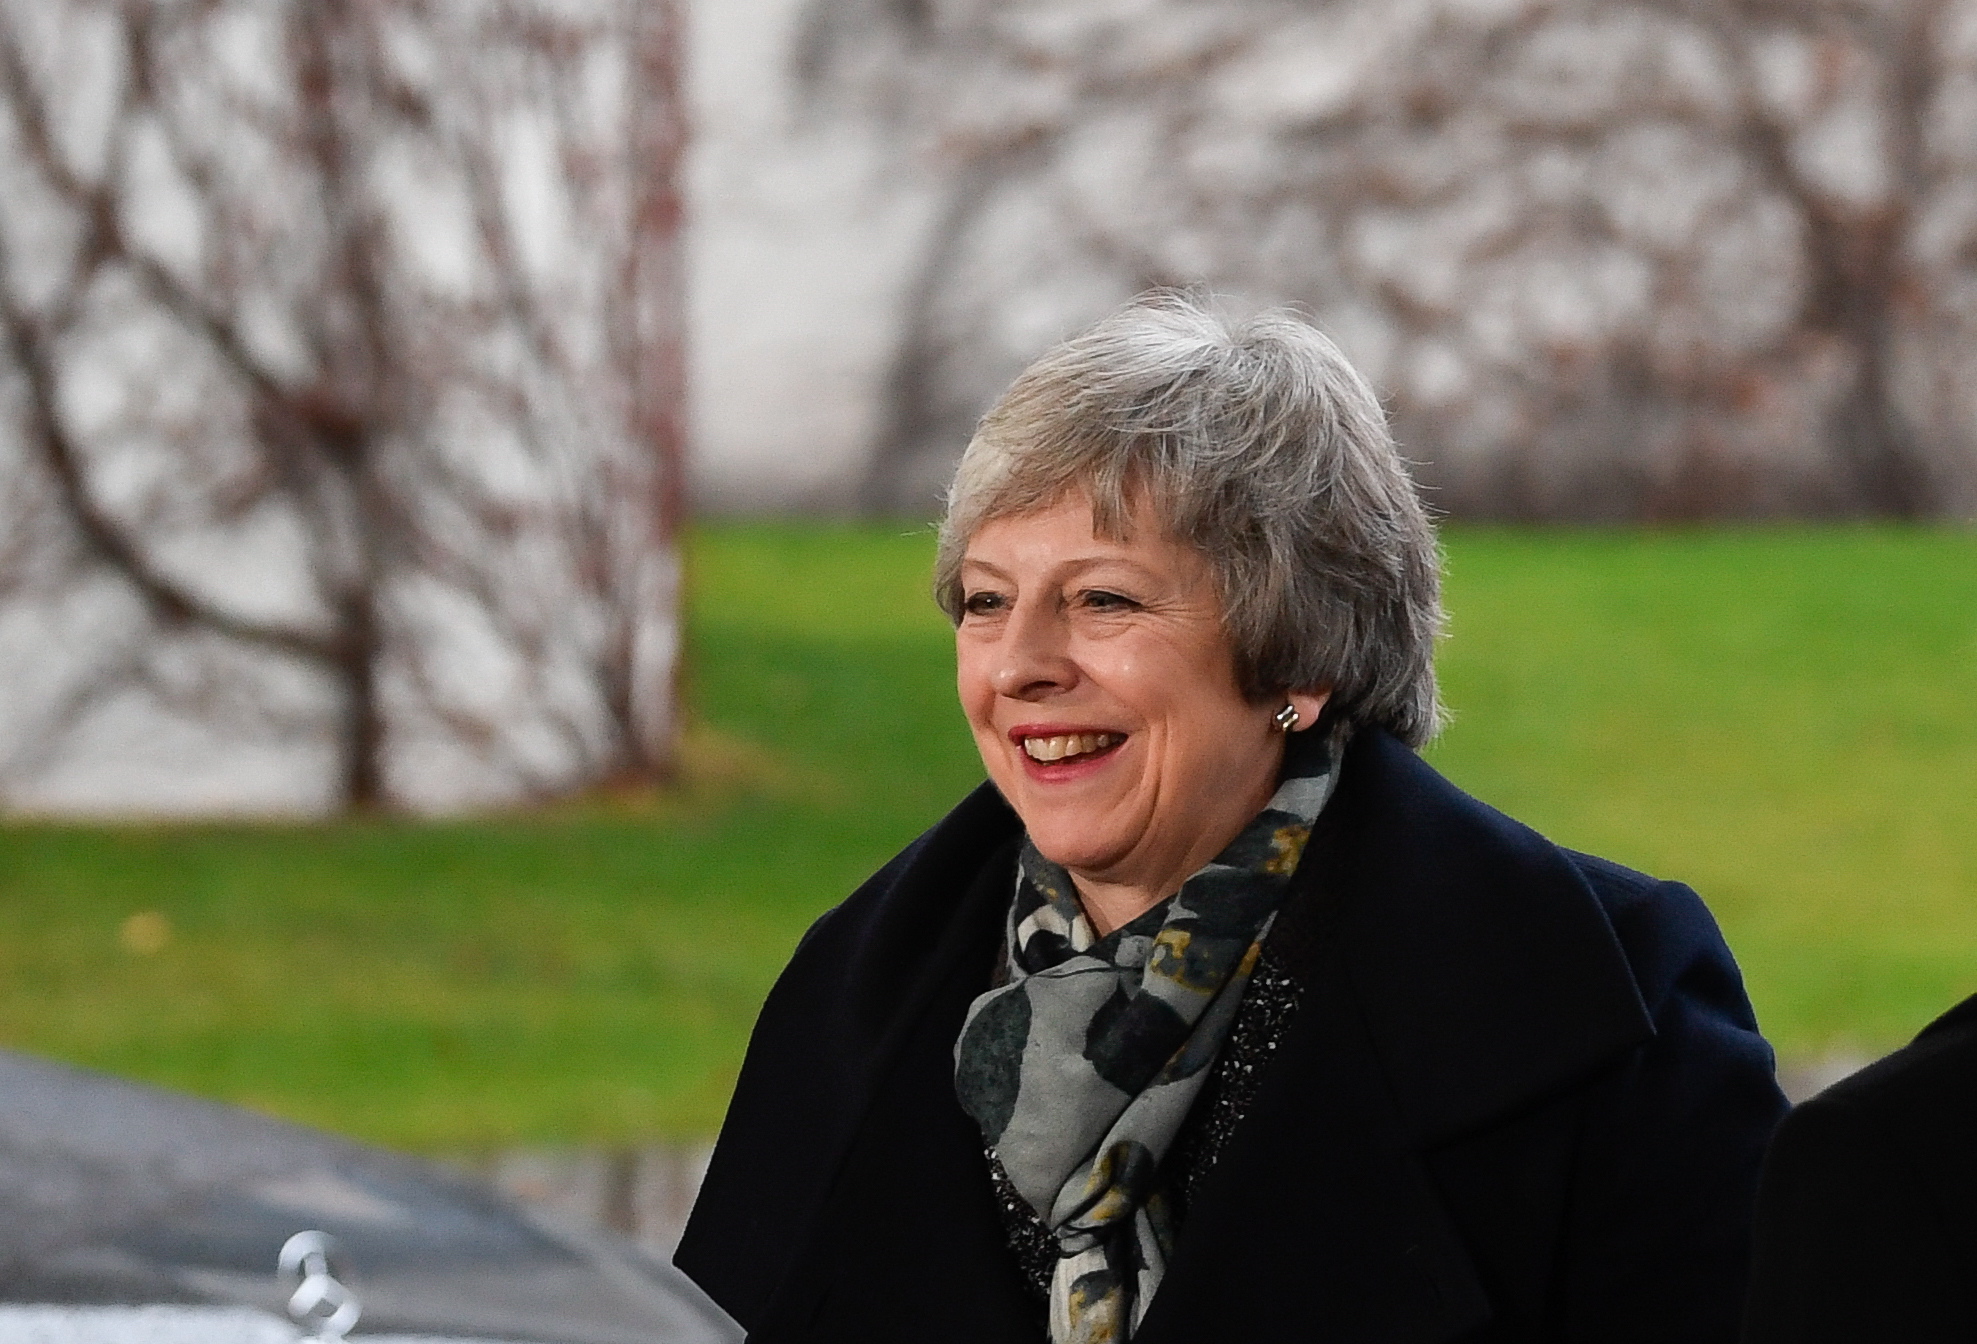 epa07223898 British Prime Minister Theresa May arrives to meet German Chancellor Angela Merkel (unseen) at the Chancellery in Berlin, Germany, 11 December 2018. British Prime Minister Theresa May postponed the Brexit deal Meaningful Vote, on 11 December 2018 due to risk of rejection from Members of Parliament. Theresa May is currently on a whistle stop tour of Europe calling on the leaders of the Netherlands, Germany and EU in Brussels looking for new guide lines for her Northern Ireland backstop.  EPA/FILIP SINGER